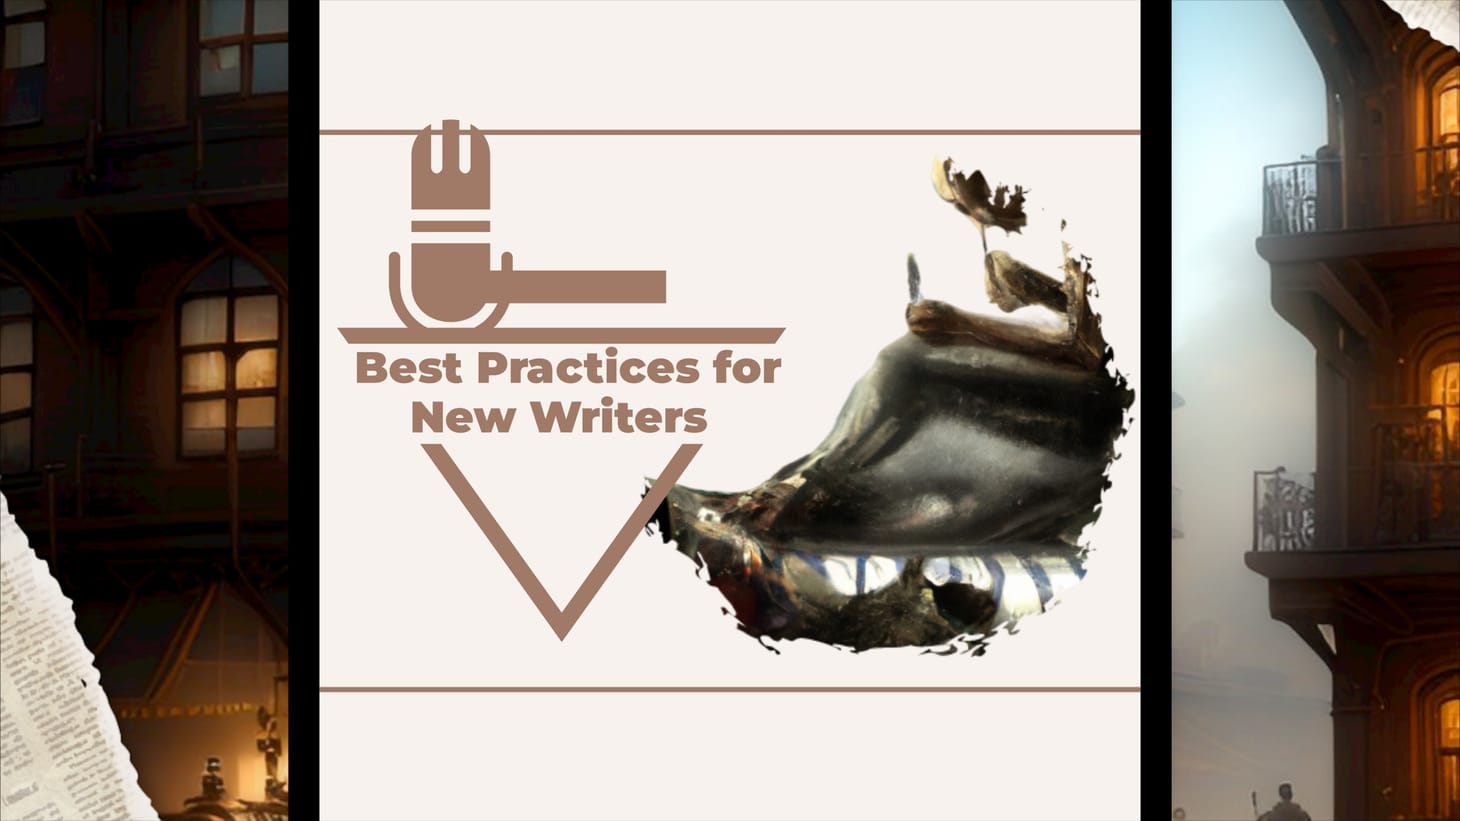 Best Practices for New Writers from a Peer's Perspective